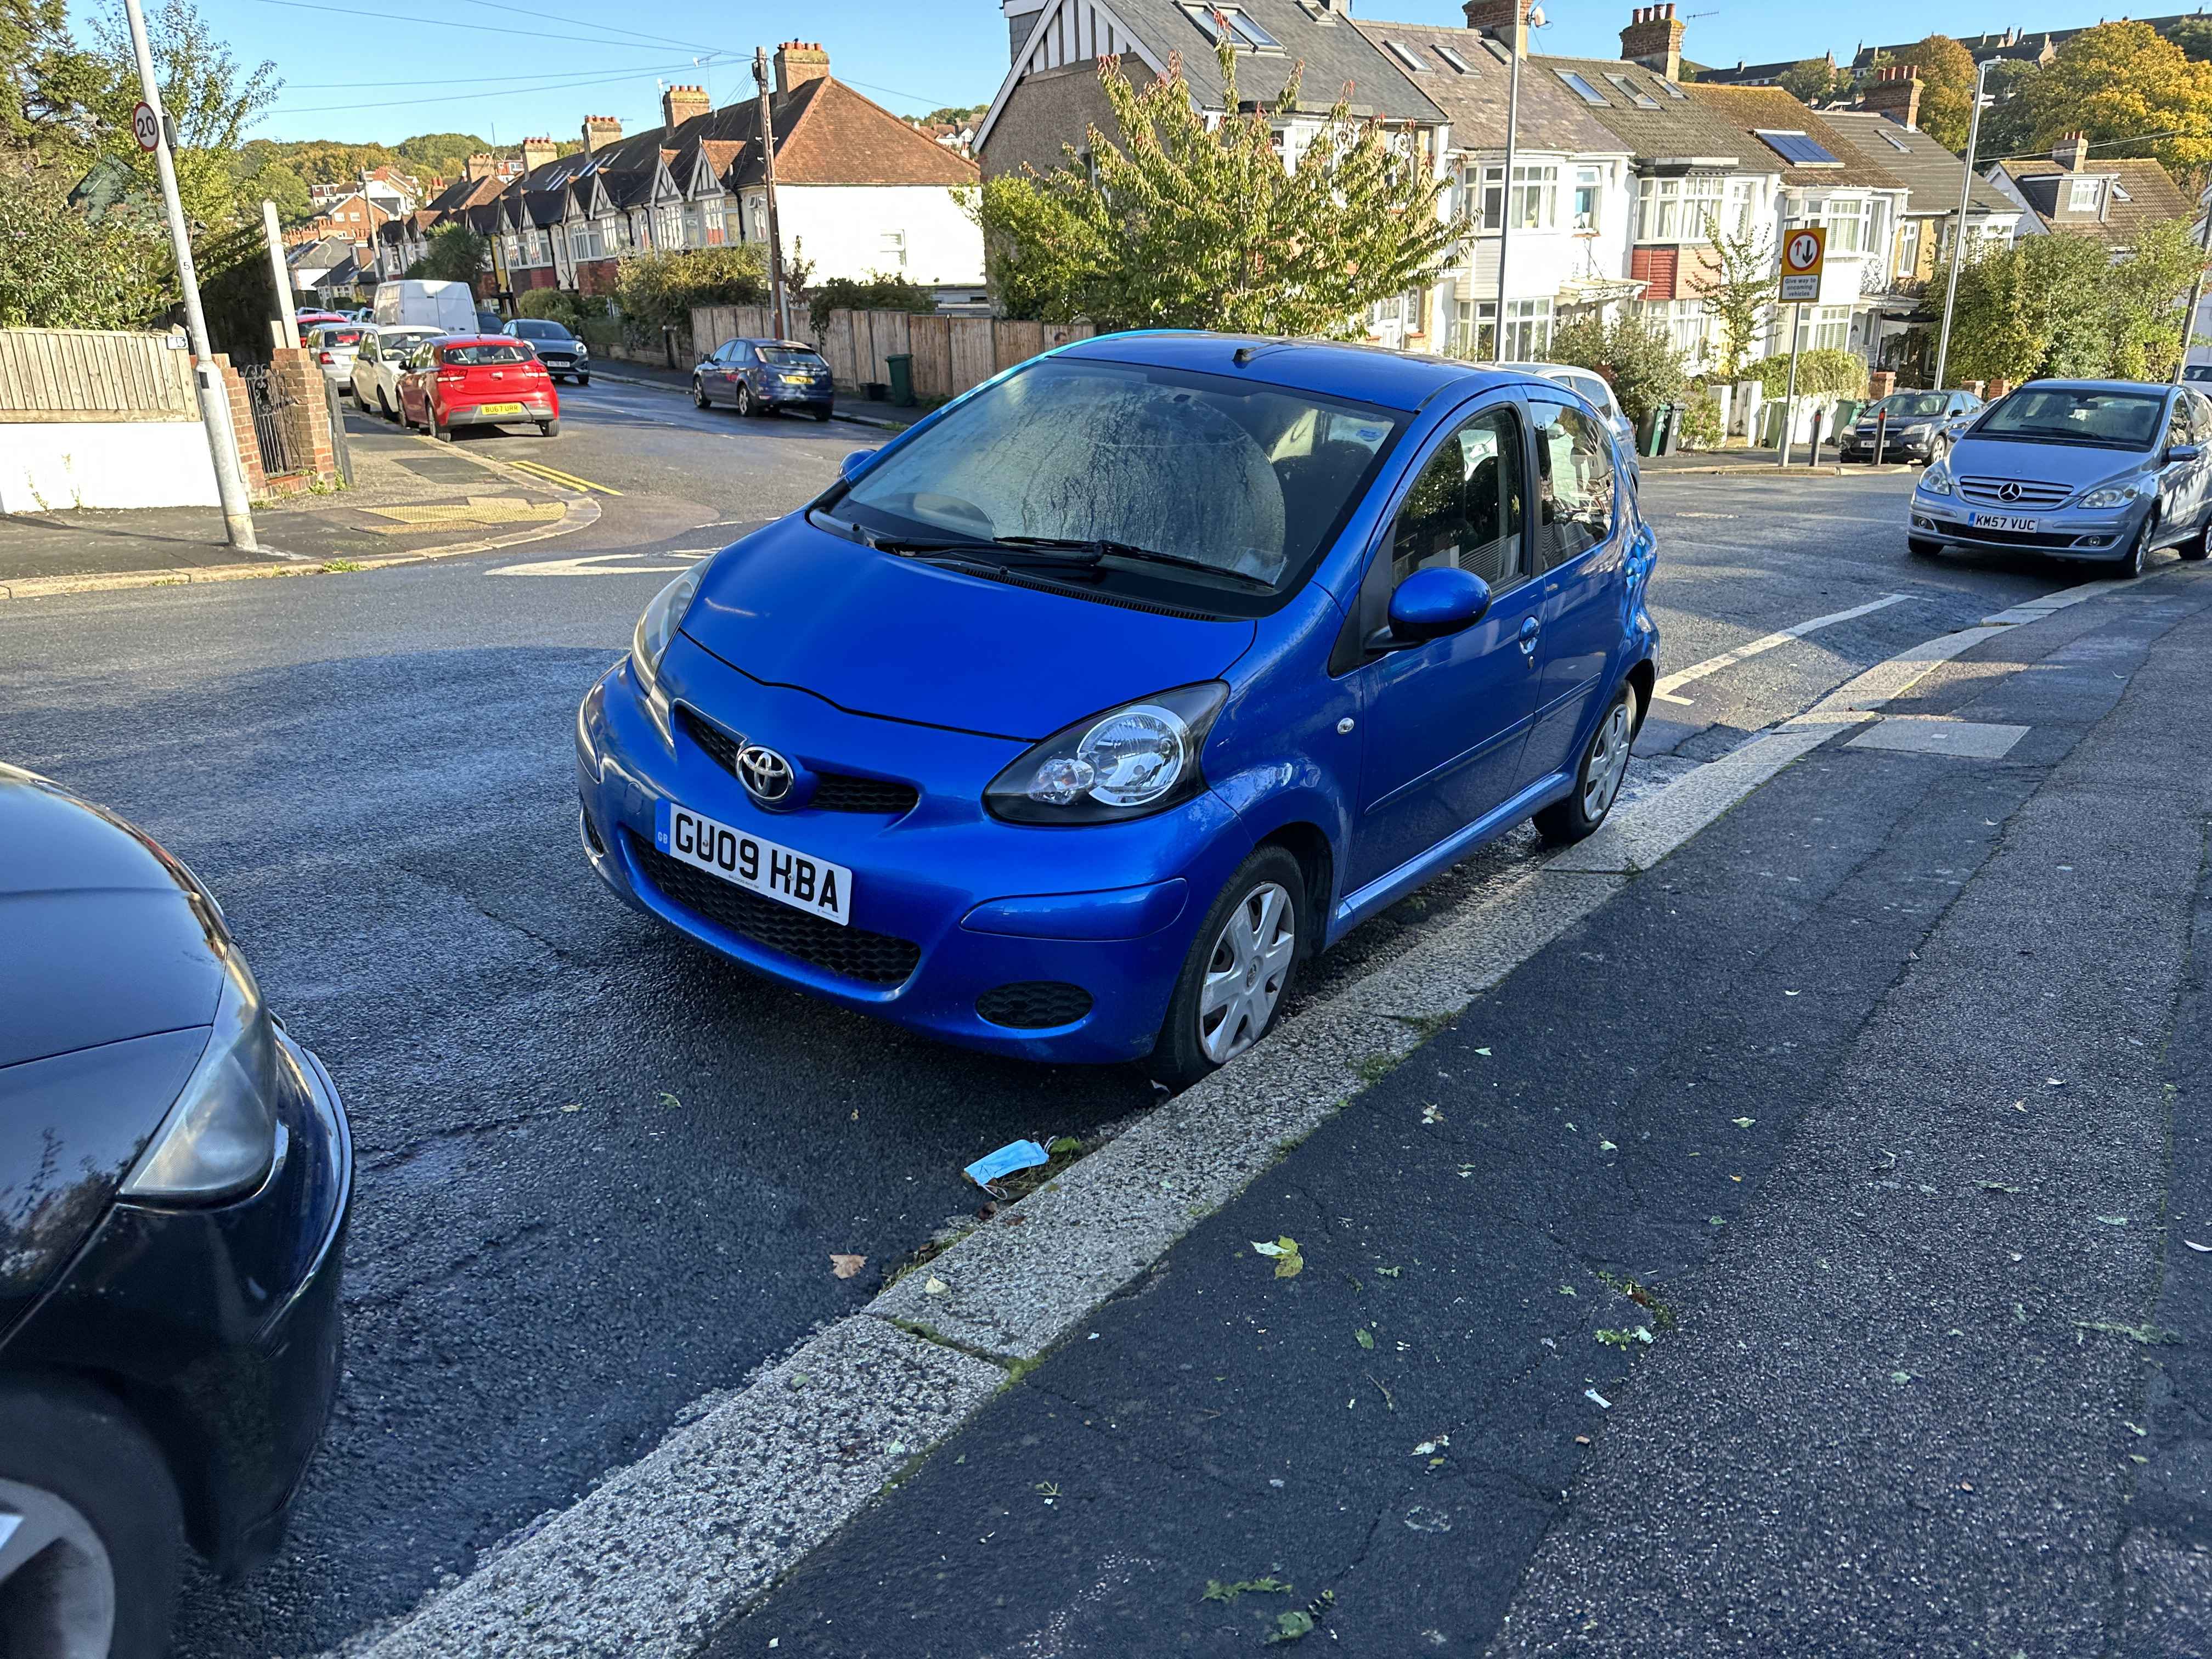 Photograph of GU09 HBA - a Blue Toyota Aygo parked in Hollingdean by a non-resident who uses the local area as part of their Brighton commute. The fourth of four photographs supplied by the residents of Hollingdean.